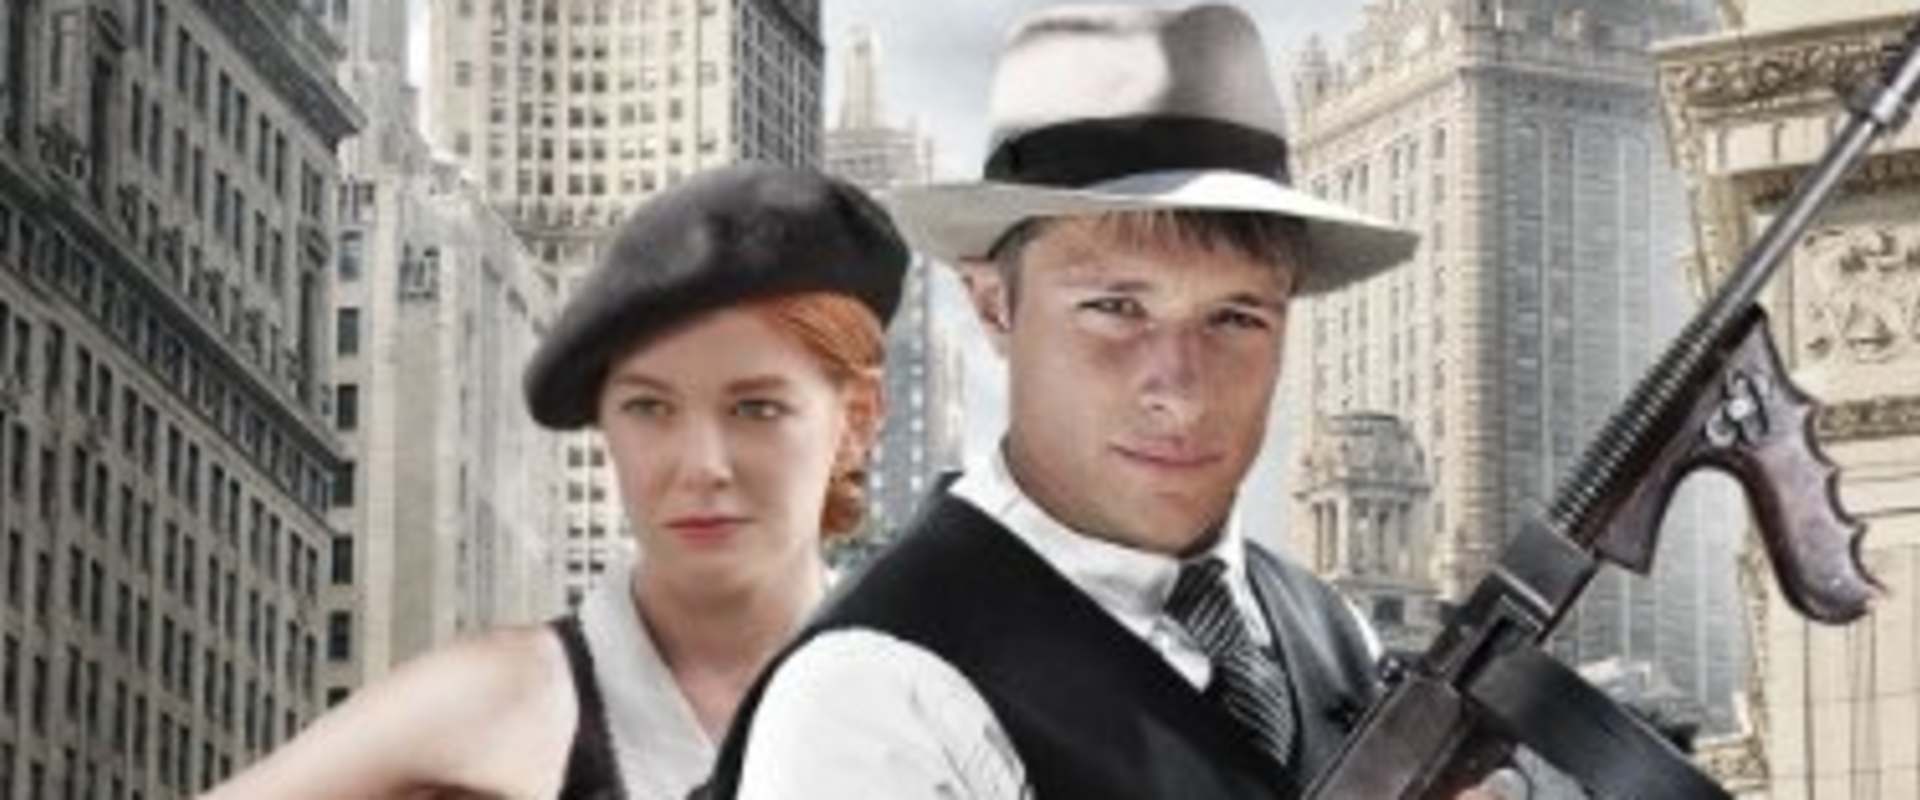 Bonnie & Clyde: Justified background 1